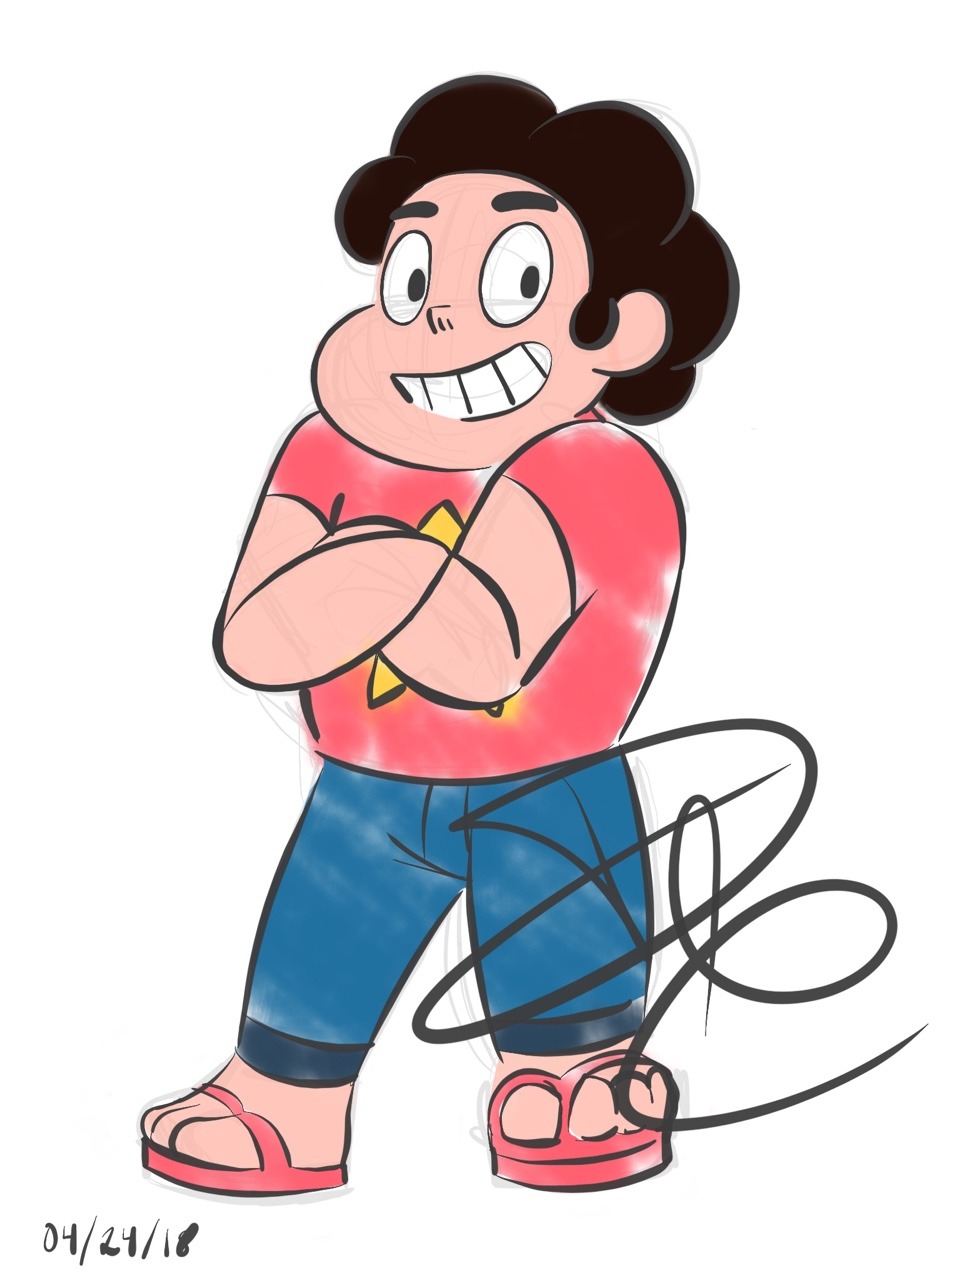 My teacher allow me to use Steven Universe as a homework assignment so I had a lot of practices drawing this ray of sunshine!